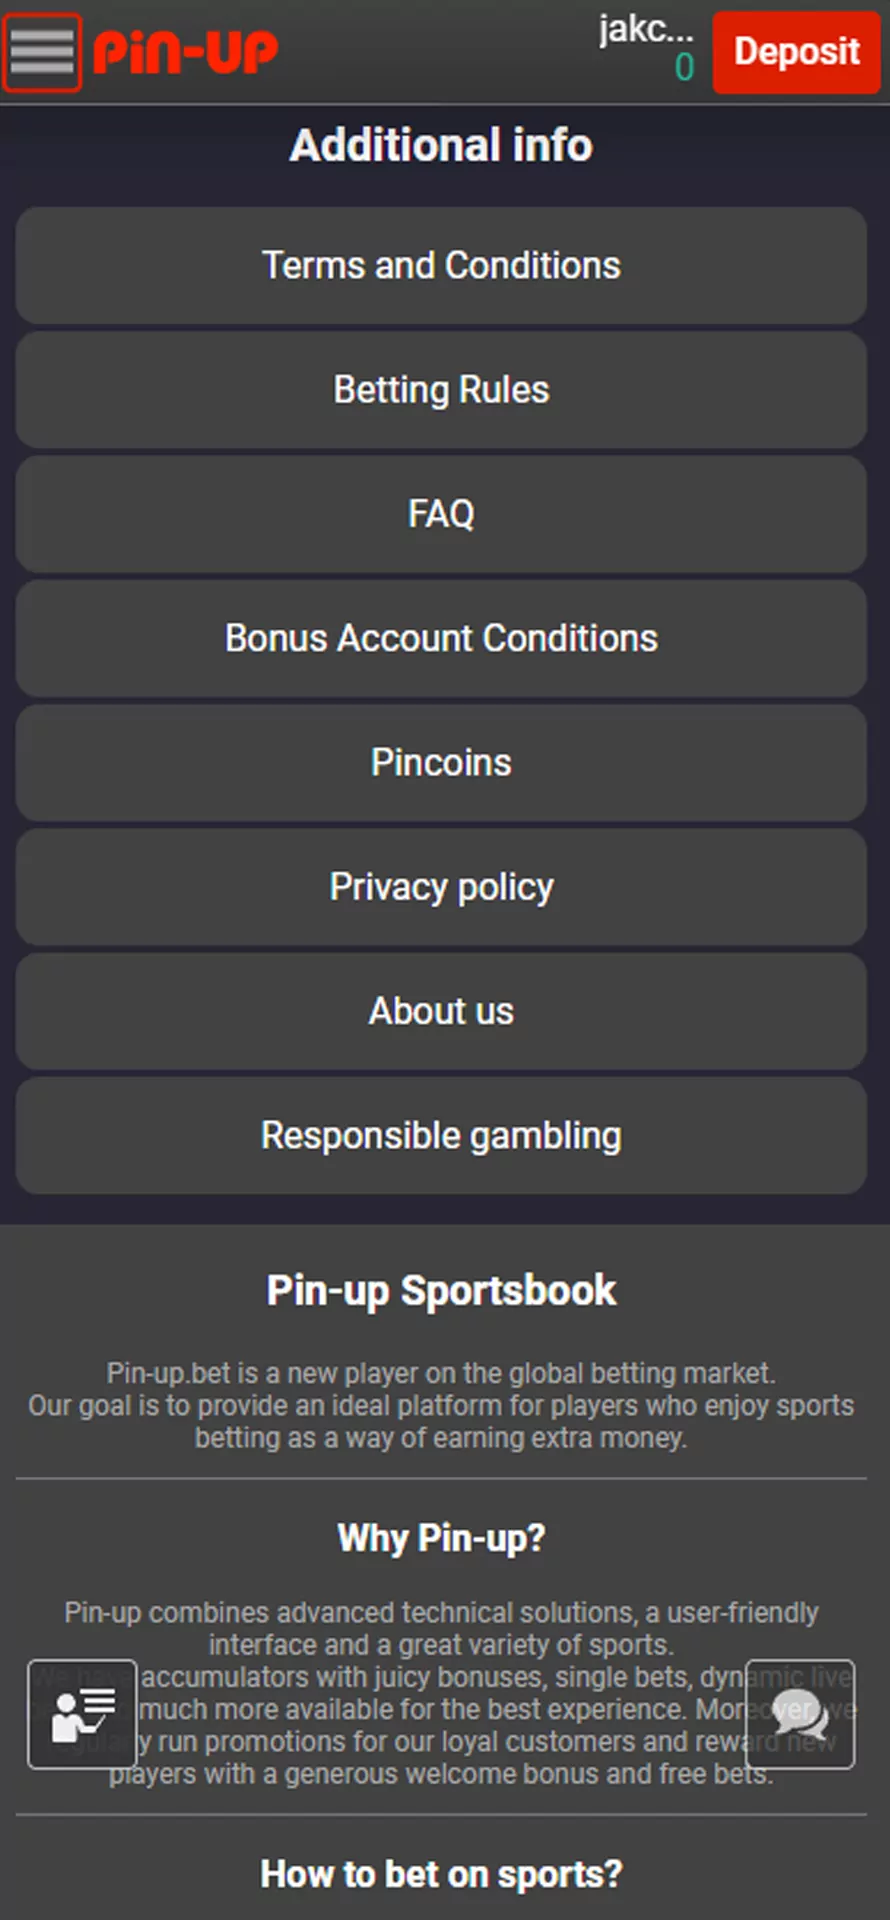 Know more about Pin Up betting.